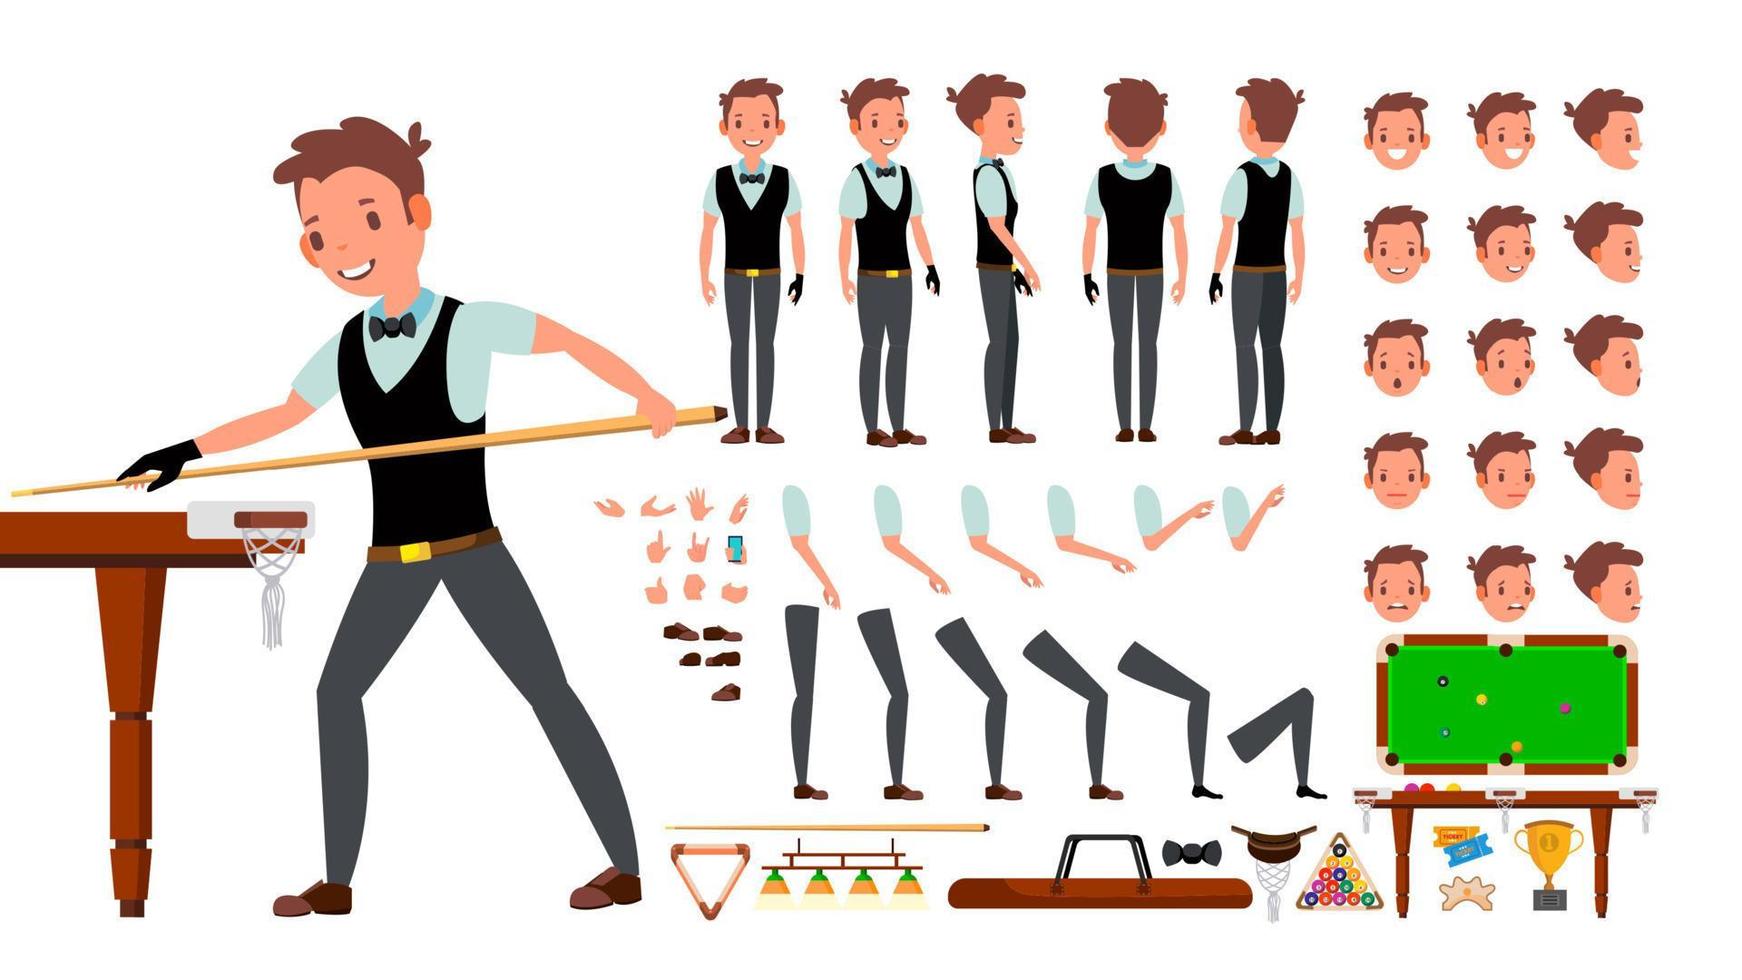 Snooker Player Male Vector. Animated Character Creation Set. Billiard. Man Full Length, Front, Side, Back View, Accessories, Poses, Face Emotions, Gestures. Isolated Flat Cartoon Illustration vector